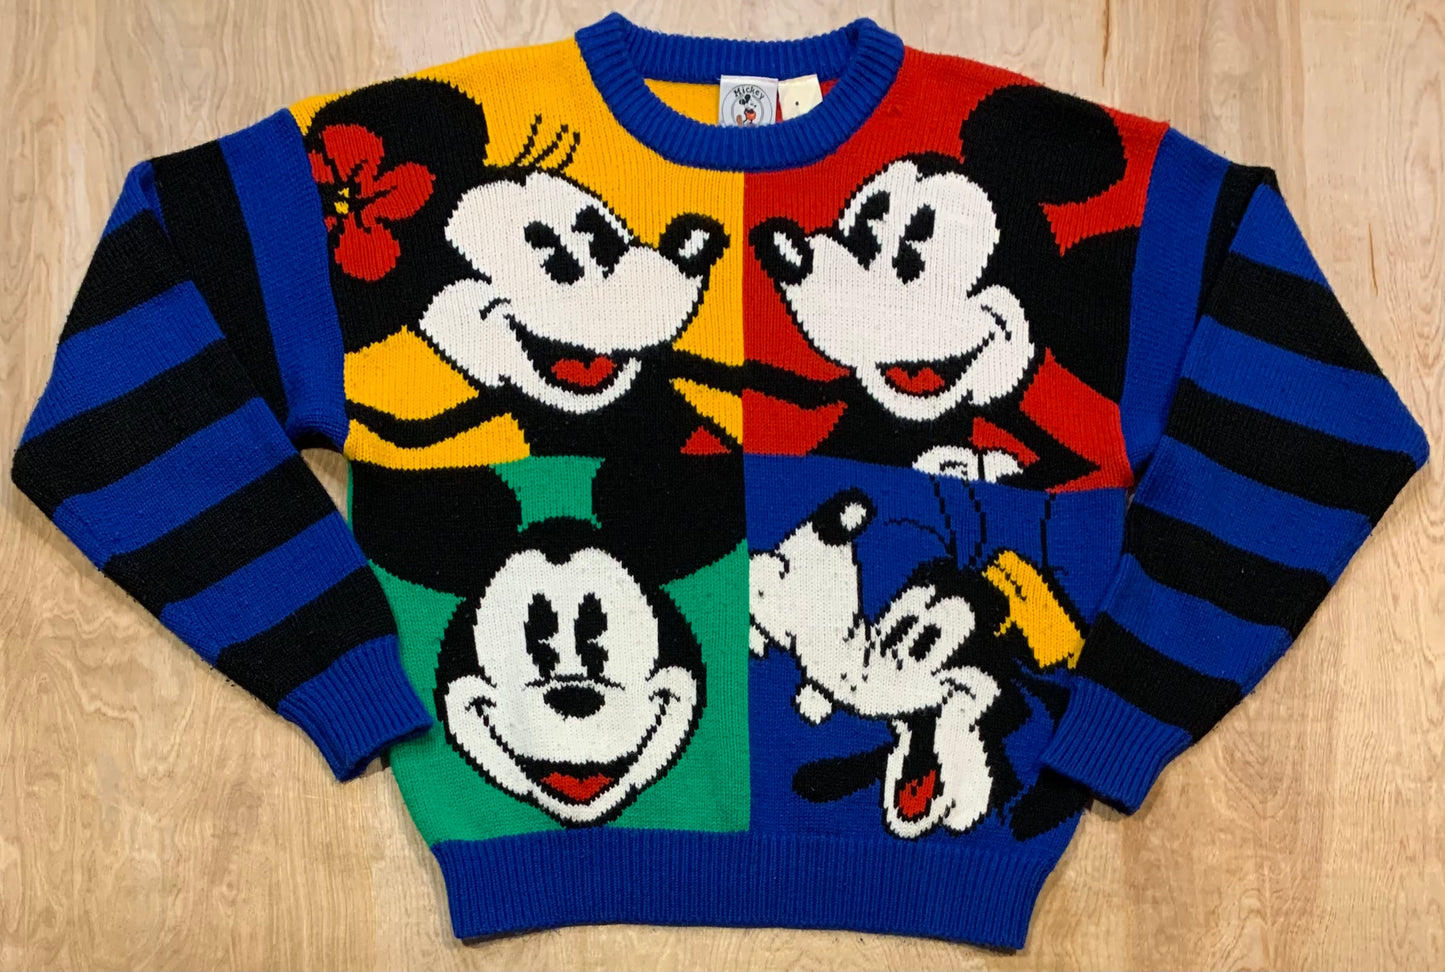 Vintage Disney Mickey Mouse and Company Sweater